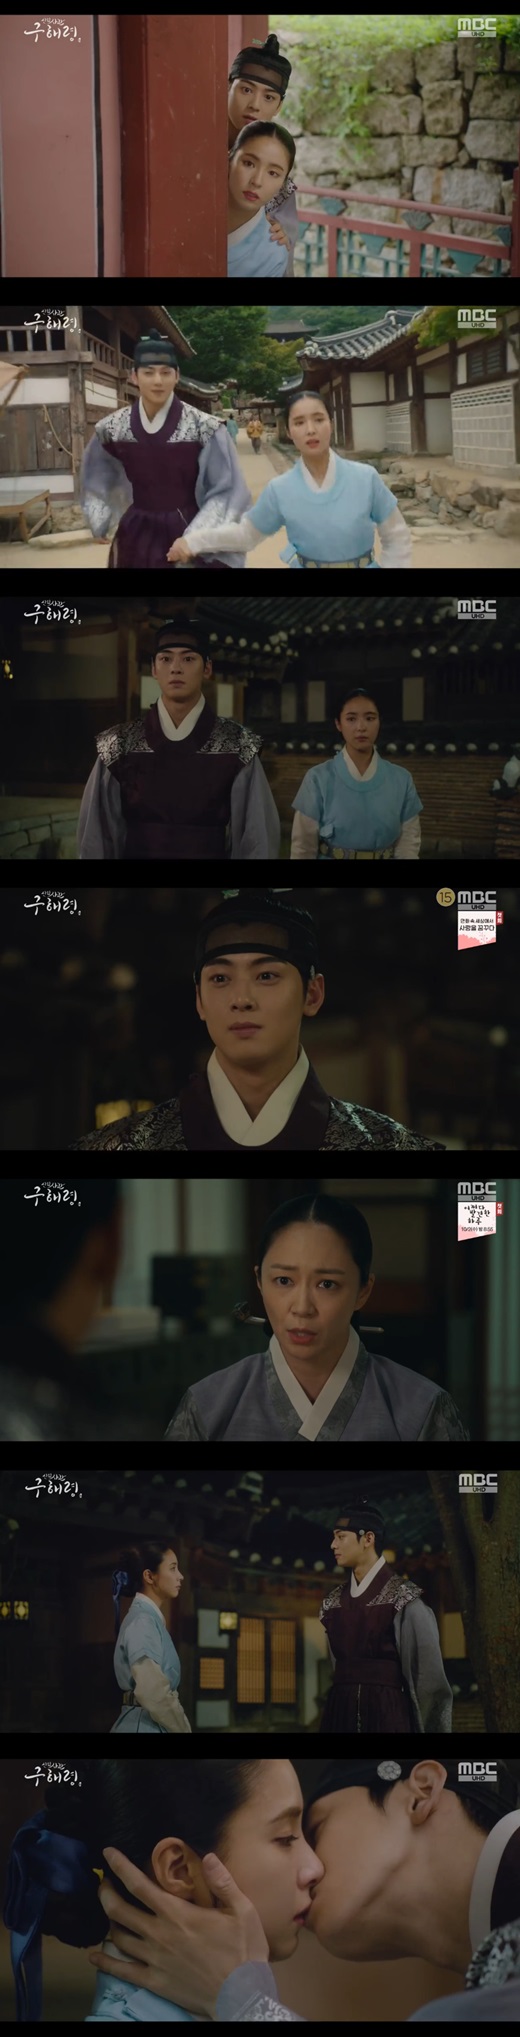 Newcomer Rookie Historian Goo Hae-ryung Shin Se-kyung and Cha Eun-woo welcomed Happy Endings.On the 26th, the last episode of the MBC drama The New Entrepreneur Rookie Historian Goo Hae-ryung (playplayed by Kim Ho-soo, directed by Kang Il-soo Han Hyun-hee) was broadcast.On that day, Rookie Historian Goo Hae-ryung (Shin Se-kyung) entered the melt-down party where Irim (Cha Eun-woo) was trapped.Rookie Historian Goo Hae-ryung and Irim, who met again there, looked at each other with fond eyes; afterward they both took their hands and walked out of the palace.Rookie Historian Goo Hae-ryung took Leerim to the place where Mohwa (Jeon Ik-ryeong) had one meaning with Leerim.Mohwa told Irim, I am going to finish everything at a banquet to be held a few days later. I kept my mind to protect Mama.If you do not return to Shinshi that day, leave here. Irim went out to sleep and thought: Rookie Historian Goo Hae-ryung went to such Irim and asked, What do you think?I was thinking about what would happen after tomorrow, so dont move in case you dont know, there should be a place to write, Irim said.Rookie Historian Goo Hae-ryung said, You dont have to do that; Ill be with you wherever Mama is. But Irim said, No.Youll live your life. I wasnt trapped in the meltdown. I waited for you. My whole life was waiting for you.I can change my name and live here and there, but if I think that I am waiting for the day to meet you someday, I can endure it. Rookie Historian Goo Hae-ryung wept when he heard Irim.Irim approached Rookie Historian Goo Hae-ryung and kissed him, wiping away tears.Irim appeared at the banquet hall and told Itae (Kim Min-sang): I am no longer a Sejo of Joseon, Irim, the son of Lee. For the past twenty years, Your Majesty has been able to kill me.Why didnt you do that, because you knew that the opposition was wrong, too? Itae shouted to the officers who wrote it down, Stop.The officer who does not retreat will be thirsty here. Rookie Historian Goo Hae-ryung said, Even if I cut myself, the essay does not stop.Another officer will come and sit here where I died, and if I kill him, another officer will come and sit down.You can never stop him from killing all the officers of this land and taking away the paper and brushes.It will be passed from mouth to mouth to teacher to disciple, from old man to child, that is the power of truth. Other officers joined in at the words of Rookie Historian Goo Hae-ryung; Min Woo-won (Lee Ji-hoon) said, Our officers can never step down.Lee Jin (Park Ki-woong) also said, A serious loyalist does not block the eyes and ears of the king.He appealed to all of the things that had happened in the year of the misfortune, and the servants joined him and asked him to accept it.Lee then visited Dae-han Lim (Kim Yeo-jin) and said, Please depose me at Sejo of Joseon, the throne is not my place.The time spent in Sejo of Joseon was also heavy enough, and now I want to live as a normal person, not as a son of anyone. Three years later, Rookie Historian Goo Hae-ryung still entered the palace as a cadet officer.Irim returned from the cruise and met Rookie Historian Goo Hae-ryung.Irim prepared a rose flower event for Rookie Historian Goo Hae-ryung, and the two once again confirmed their hearts toward each other.